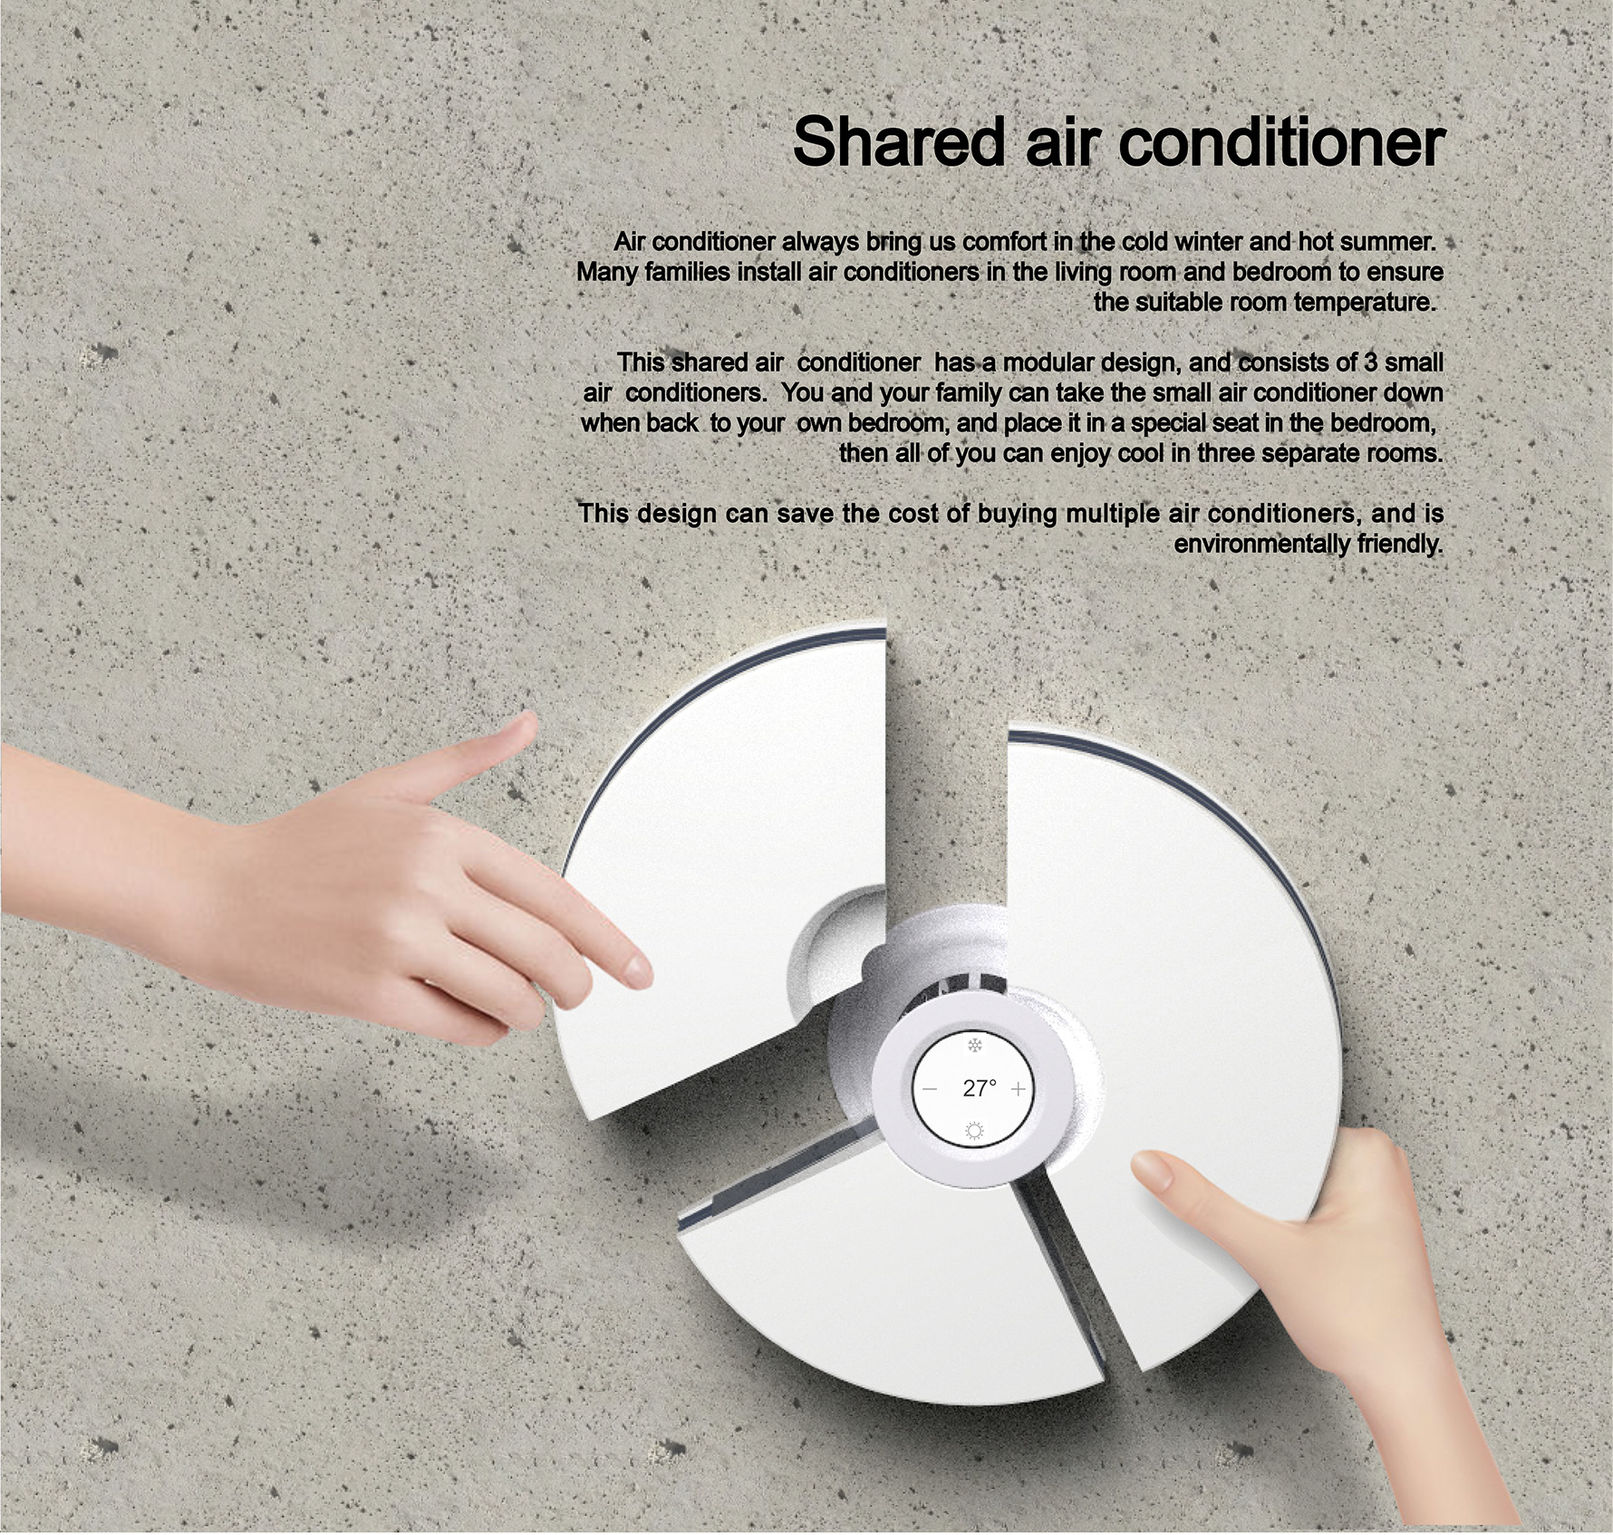 Sharing Air Conditioner If World Design Guide